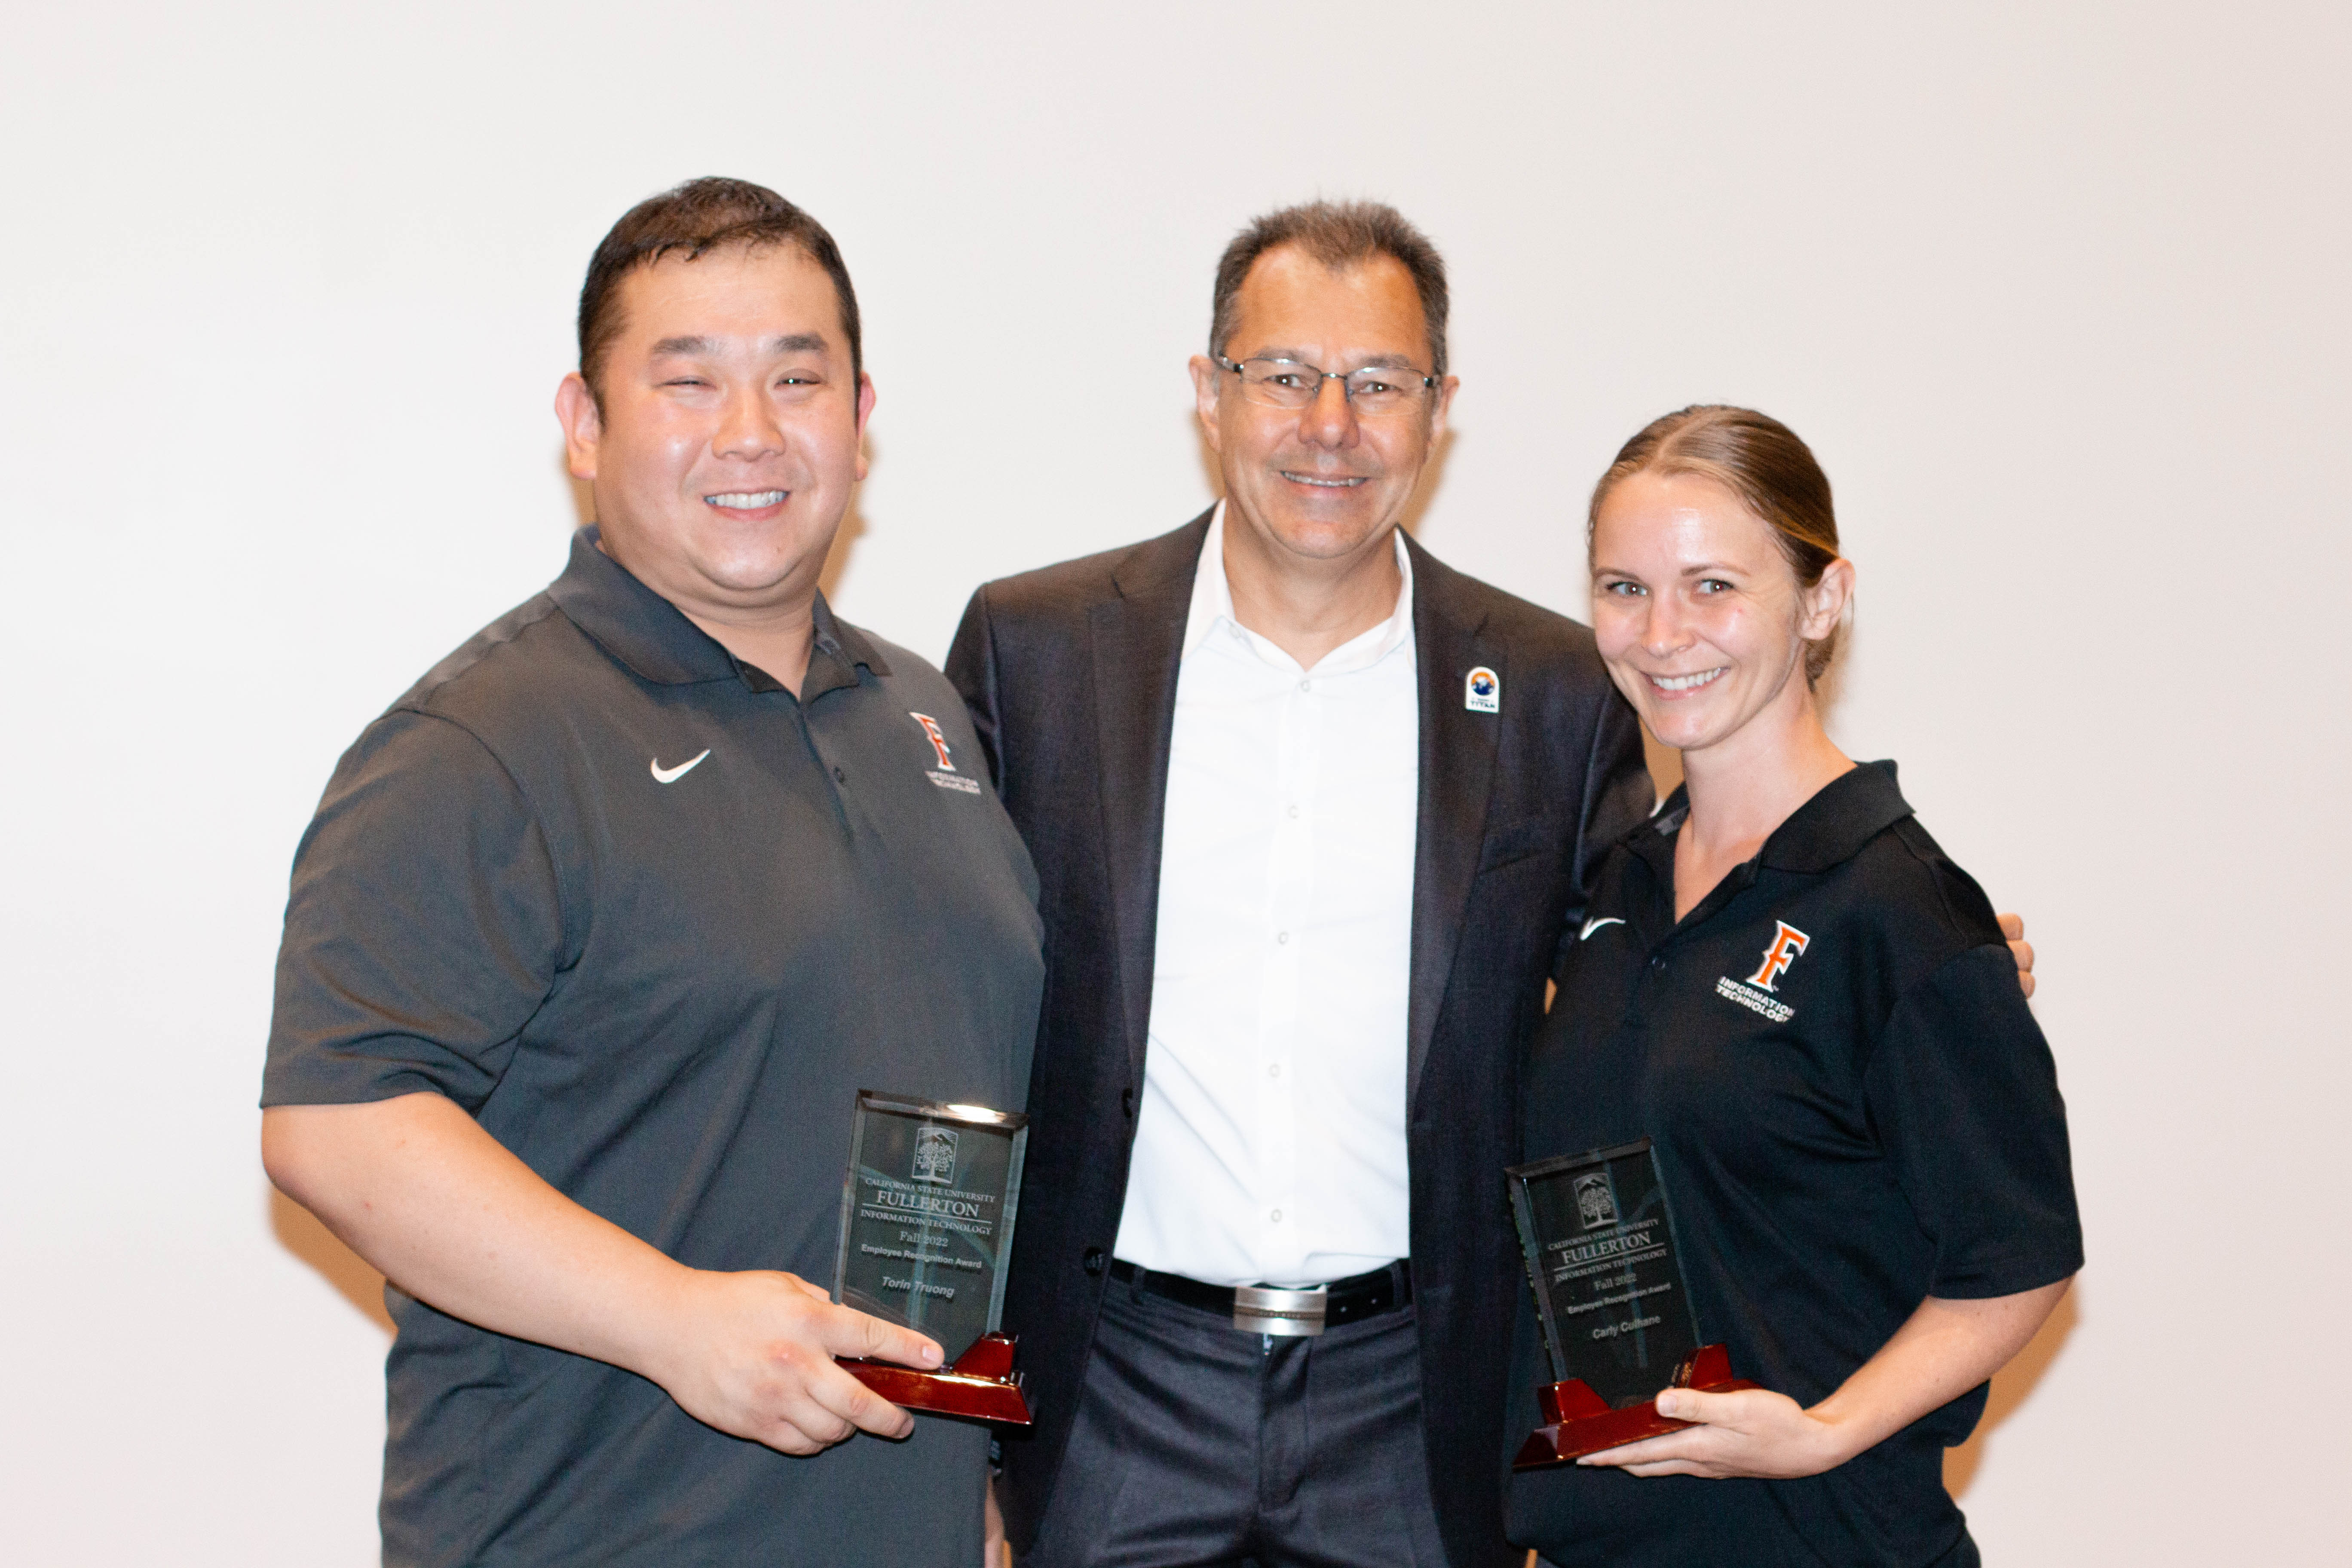 Vice President Amir Dabirian congratulates award winners Torin Truong and Carly Culhane on winning the employee recognition for Fall 2022. 